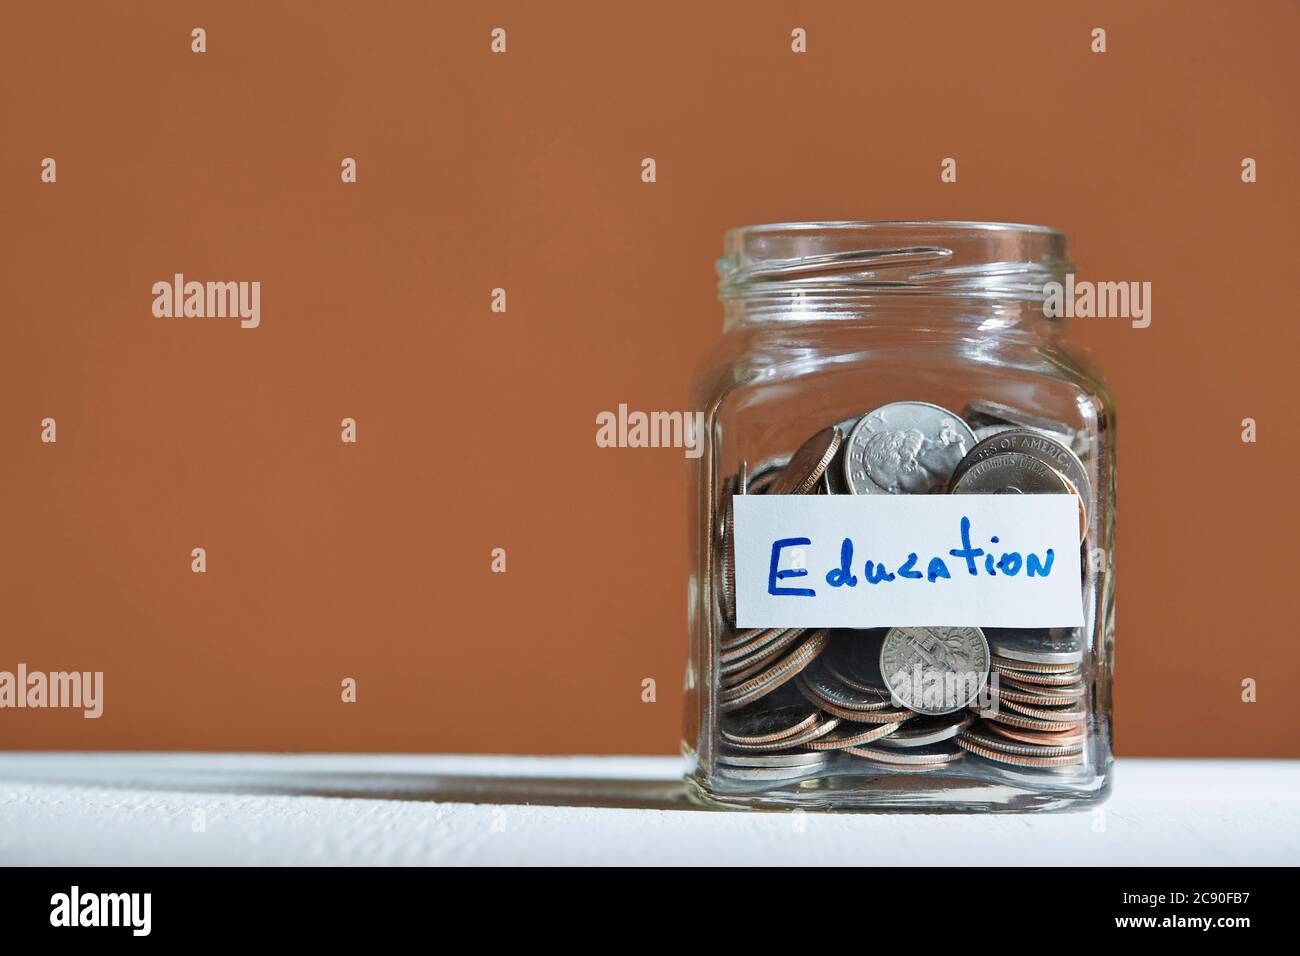 Coins in jar collected for education Stock Photo